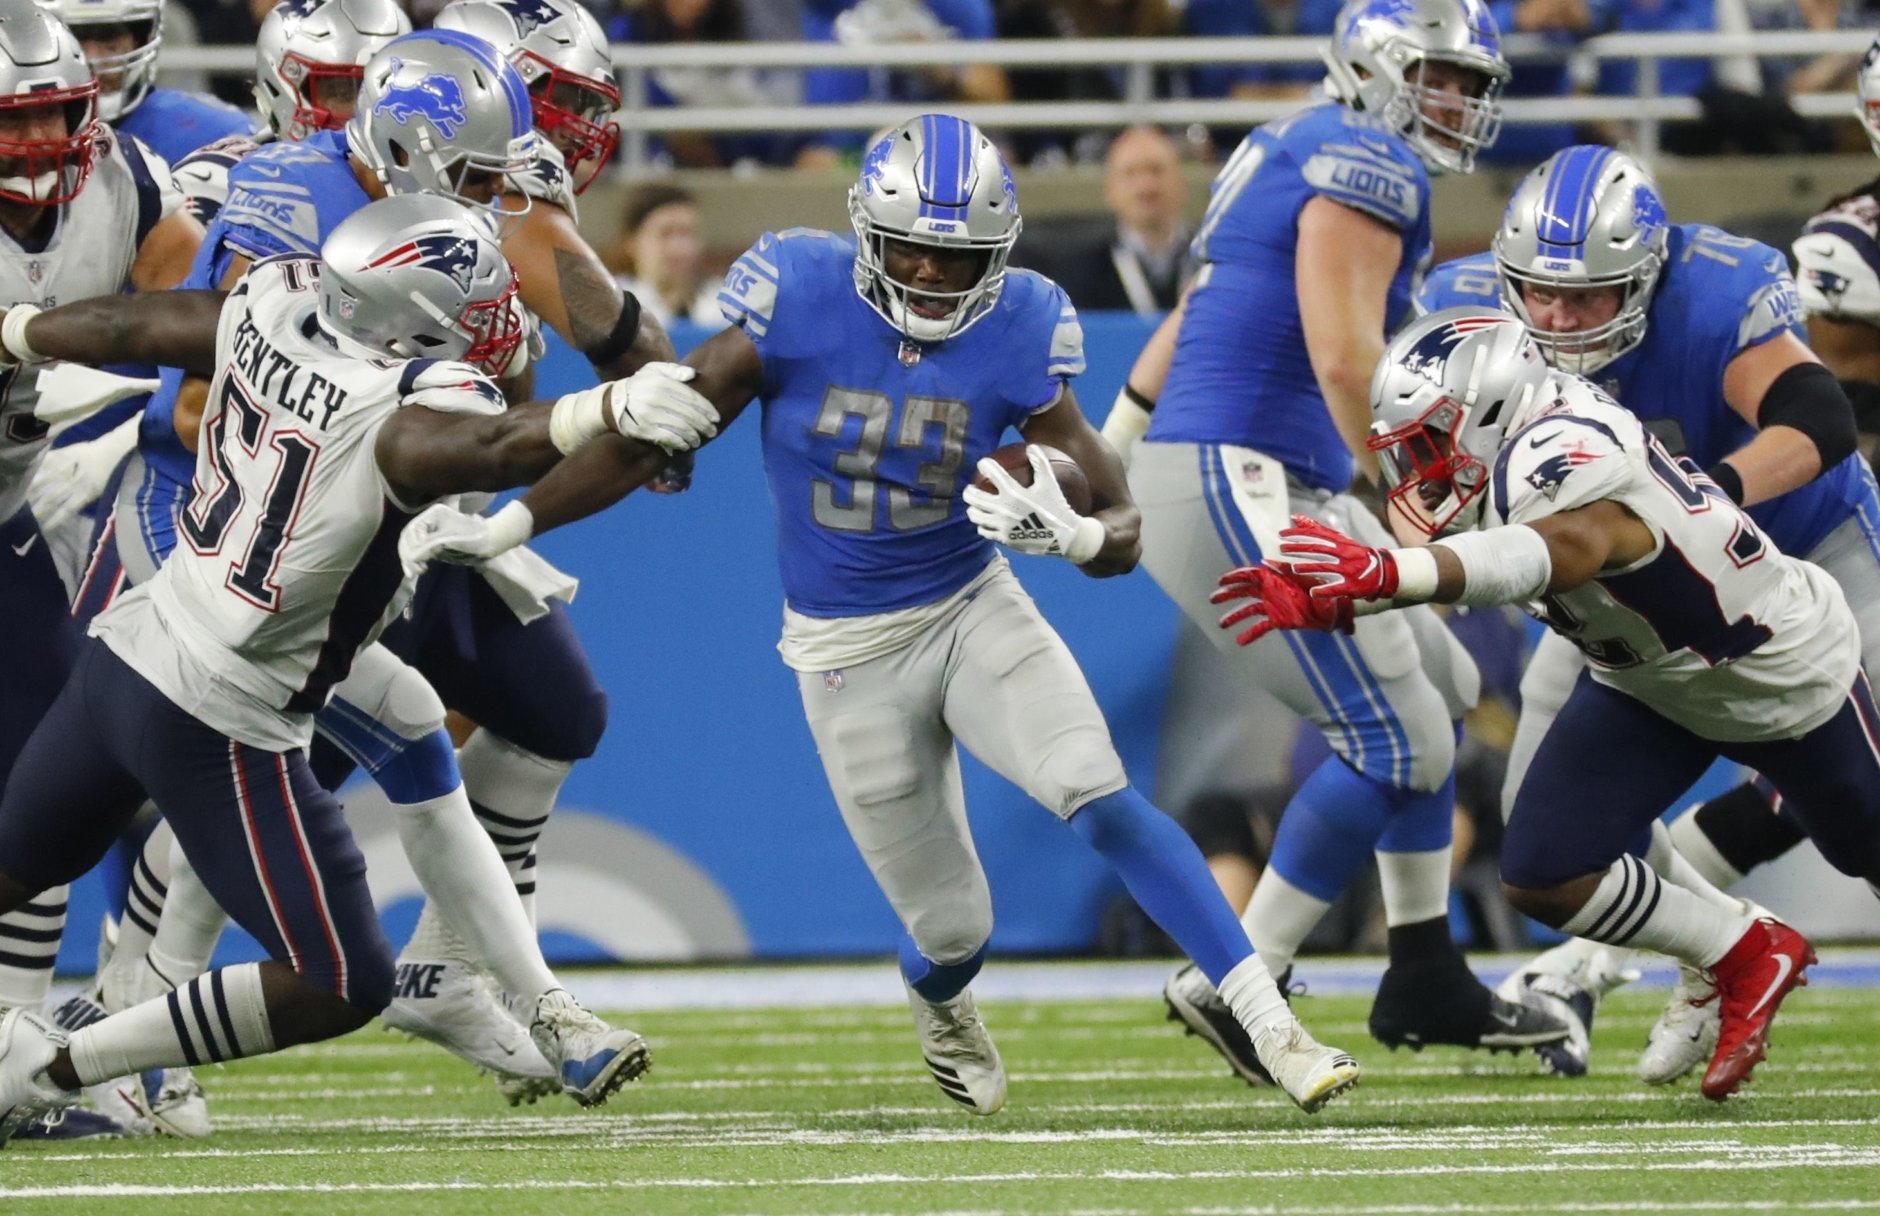 Detroit Lions running back Kerryon Johnson (33) breaks through the New England Patriots line during the second half of an NFL football game, Sunday, Sept. 23, 2018, in Detroit. (AP Photo/Rick Osentoski)